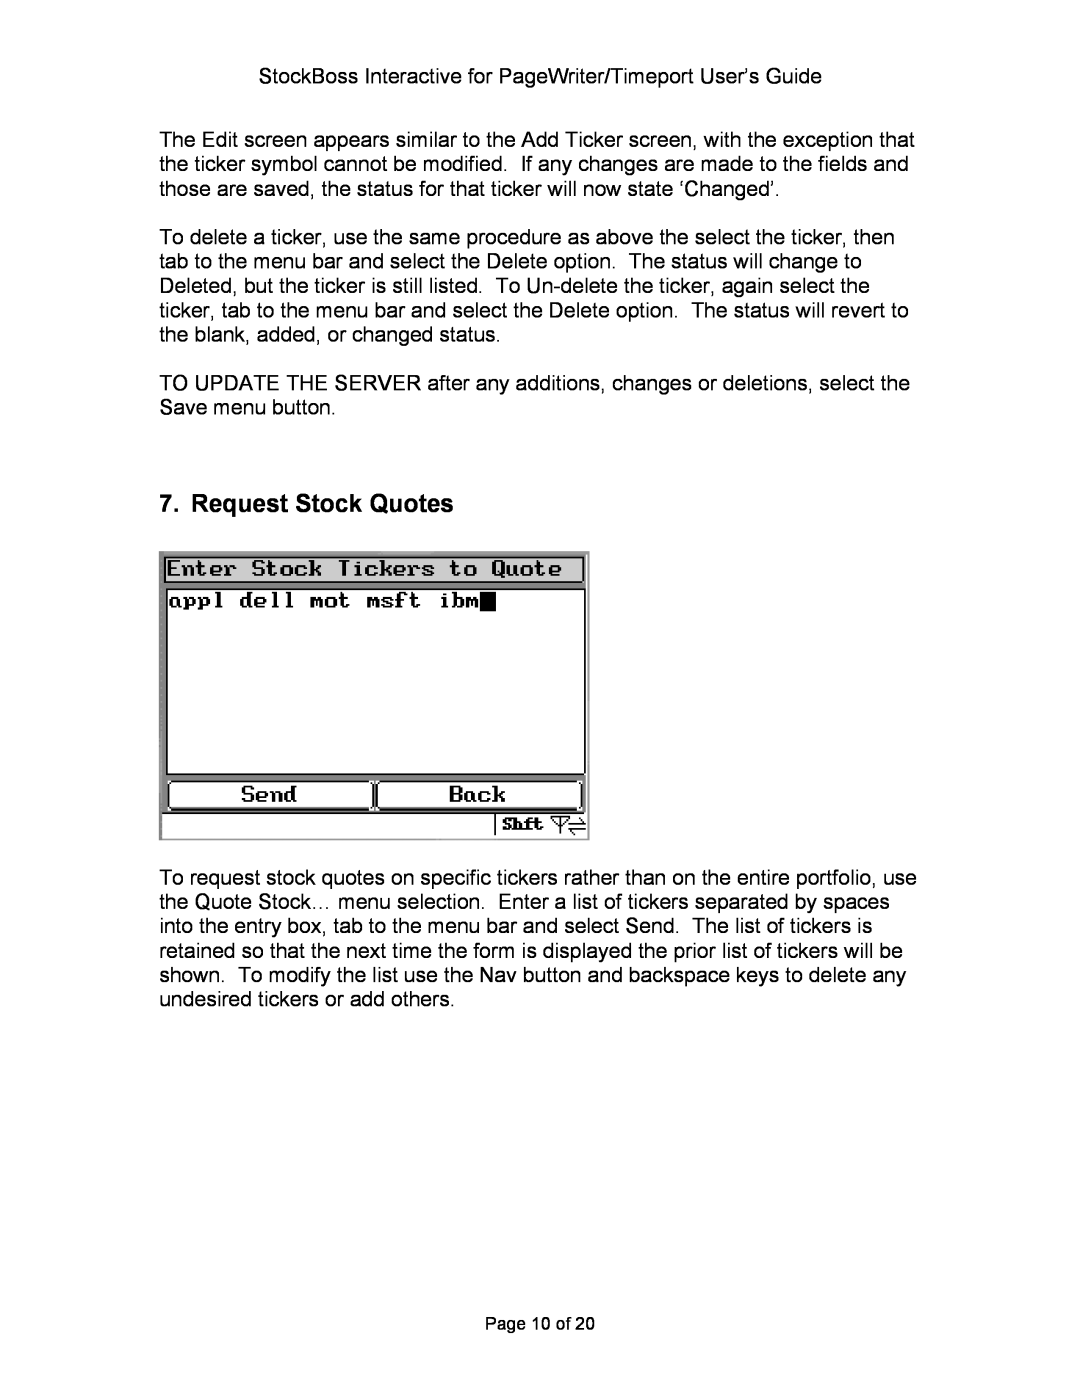 Motorola P930 Series manual Request Stock Quotes, Page 10 of 